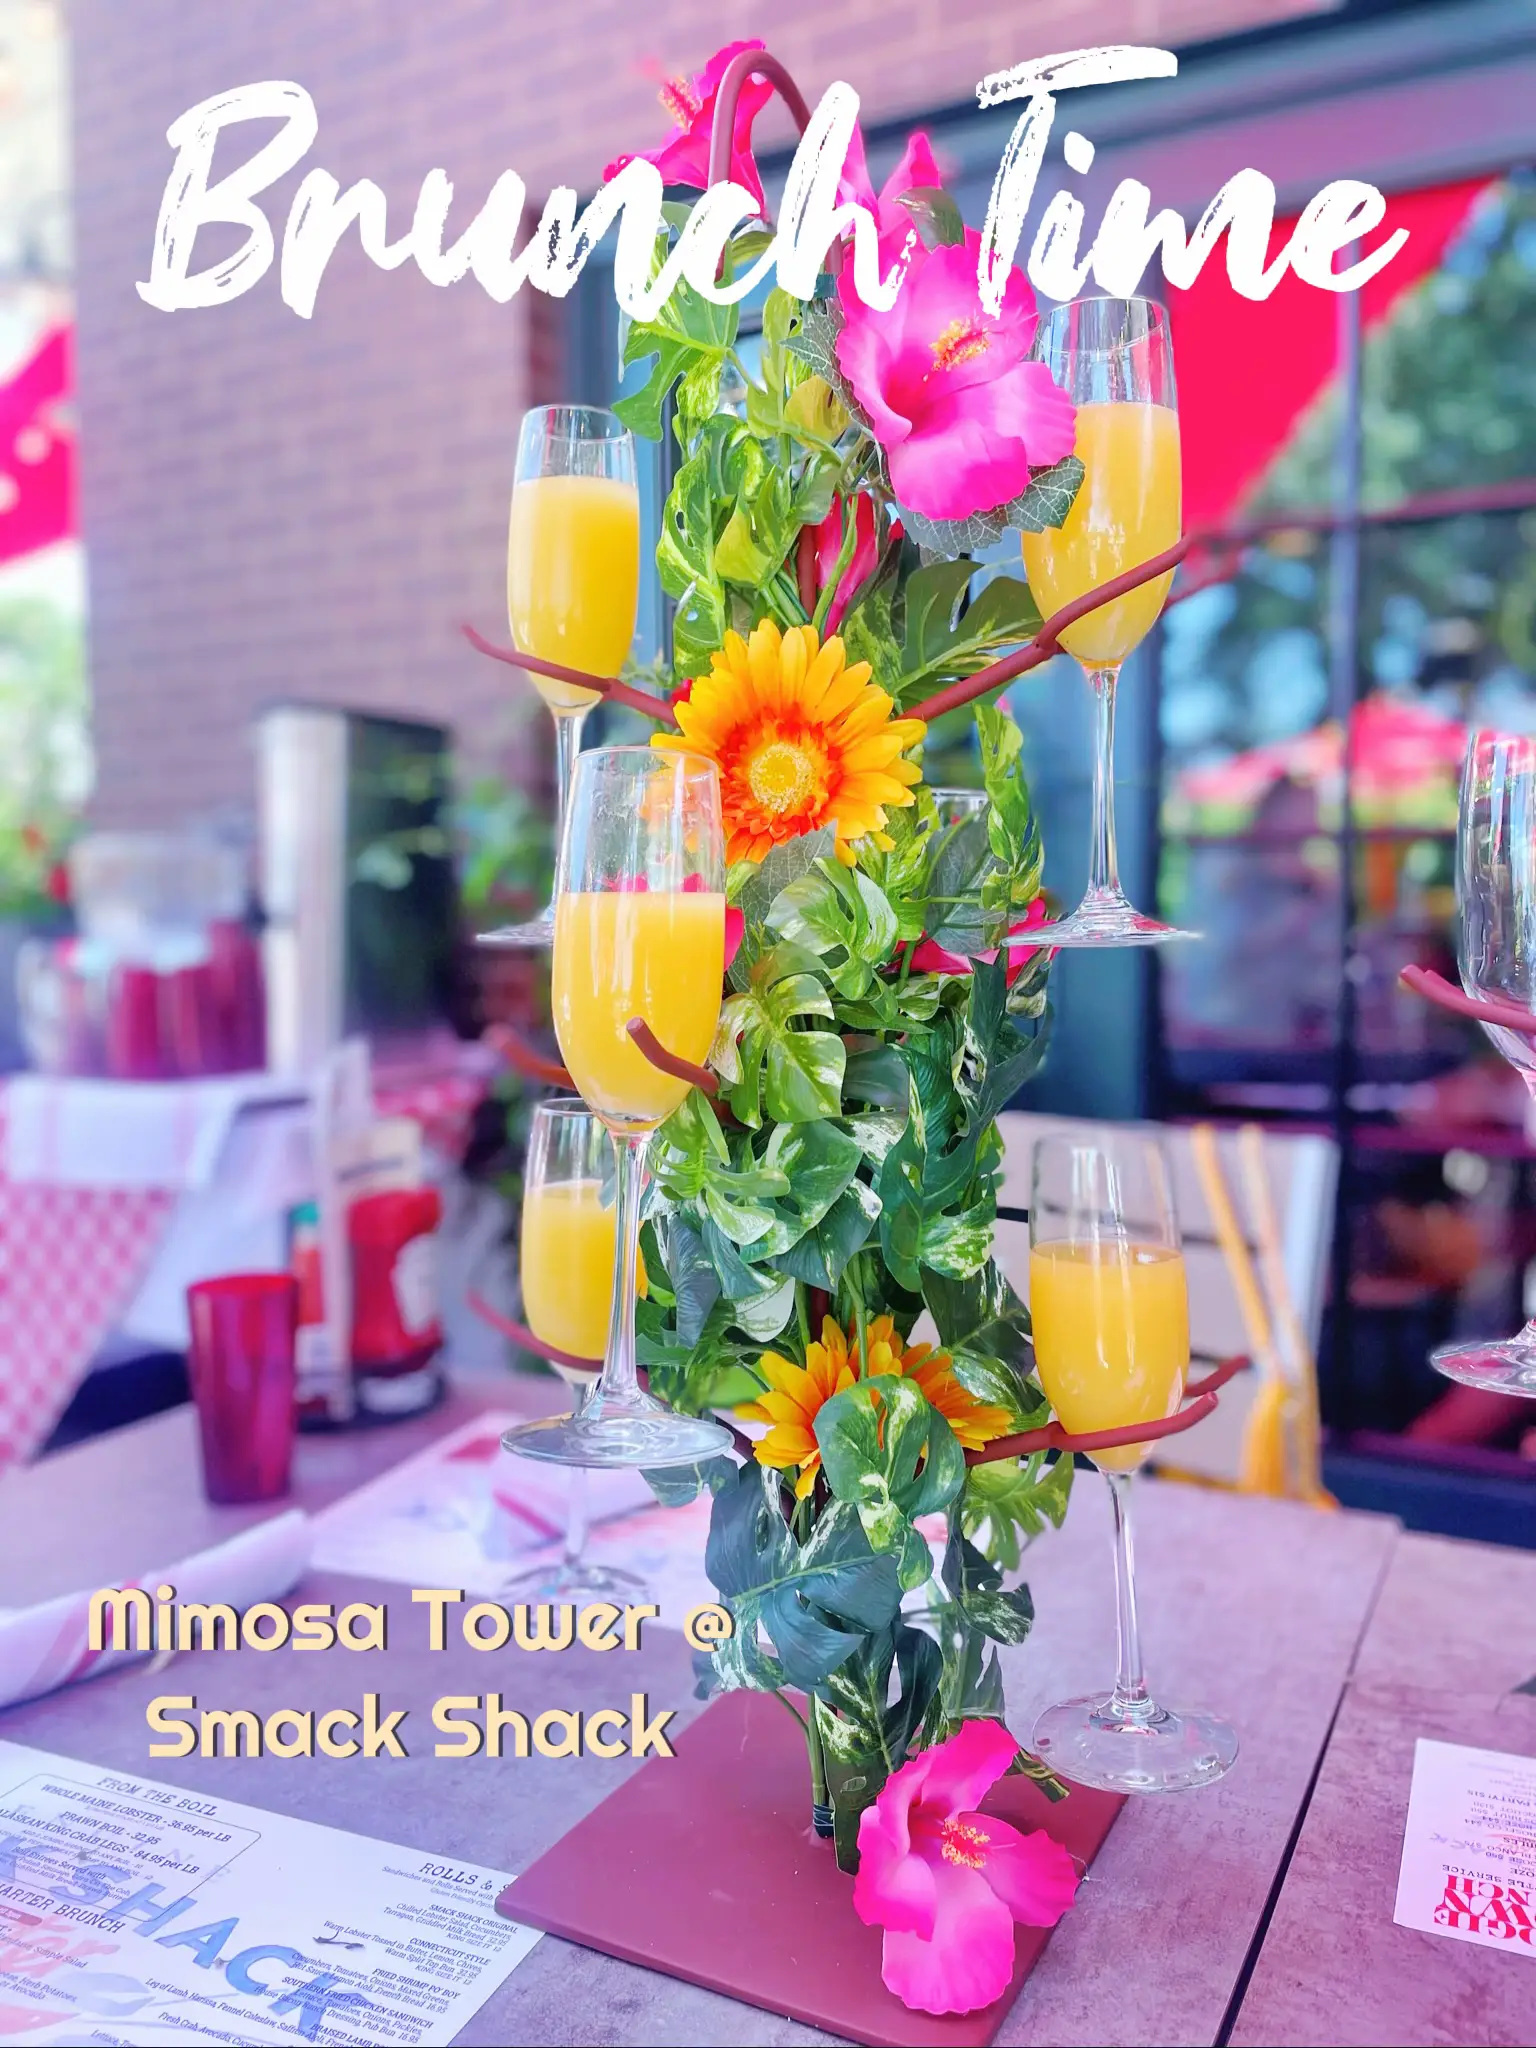 Mimosa Tower @ Smack Shack, Gallery posted by Eat Minnesota